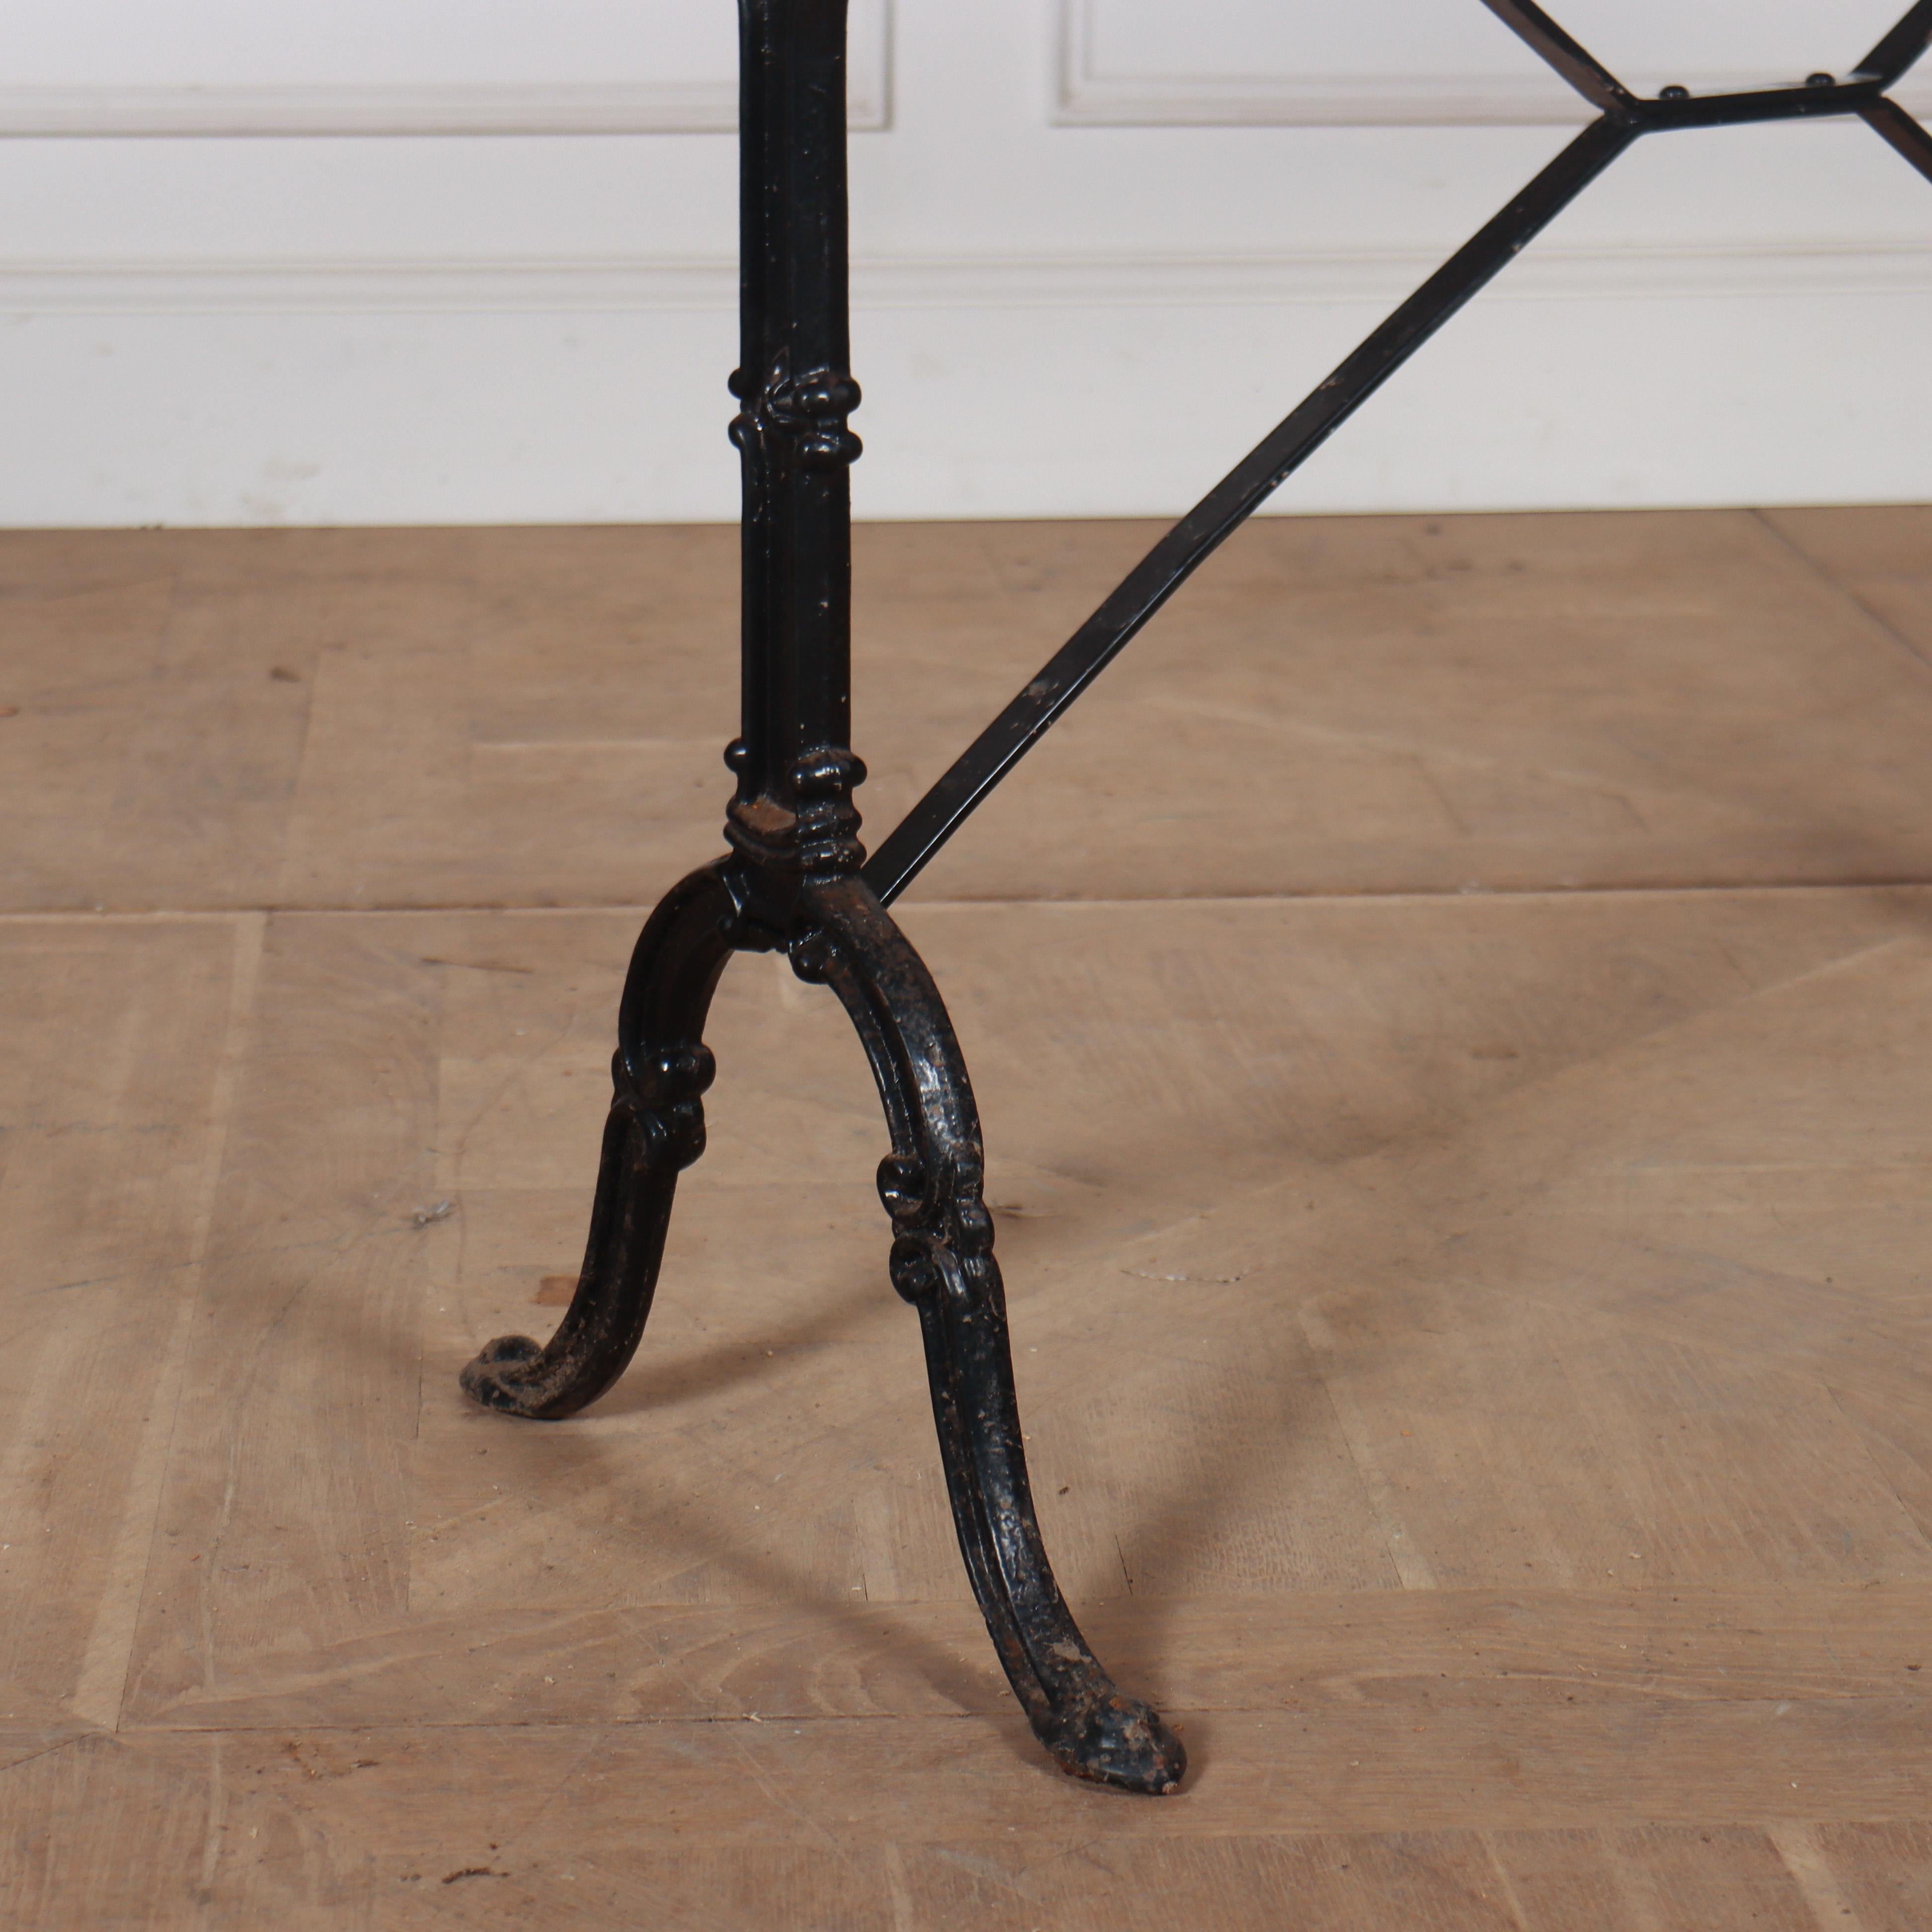 Iron French Bistro Table